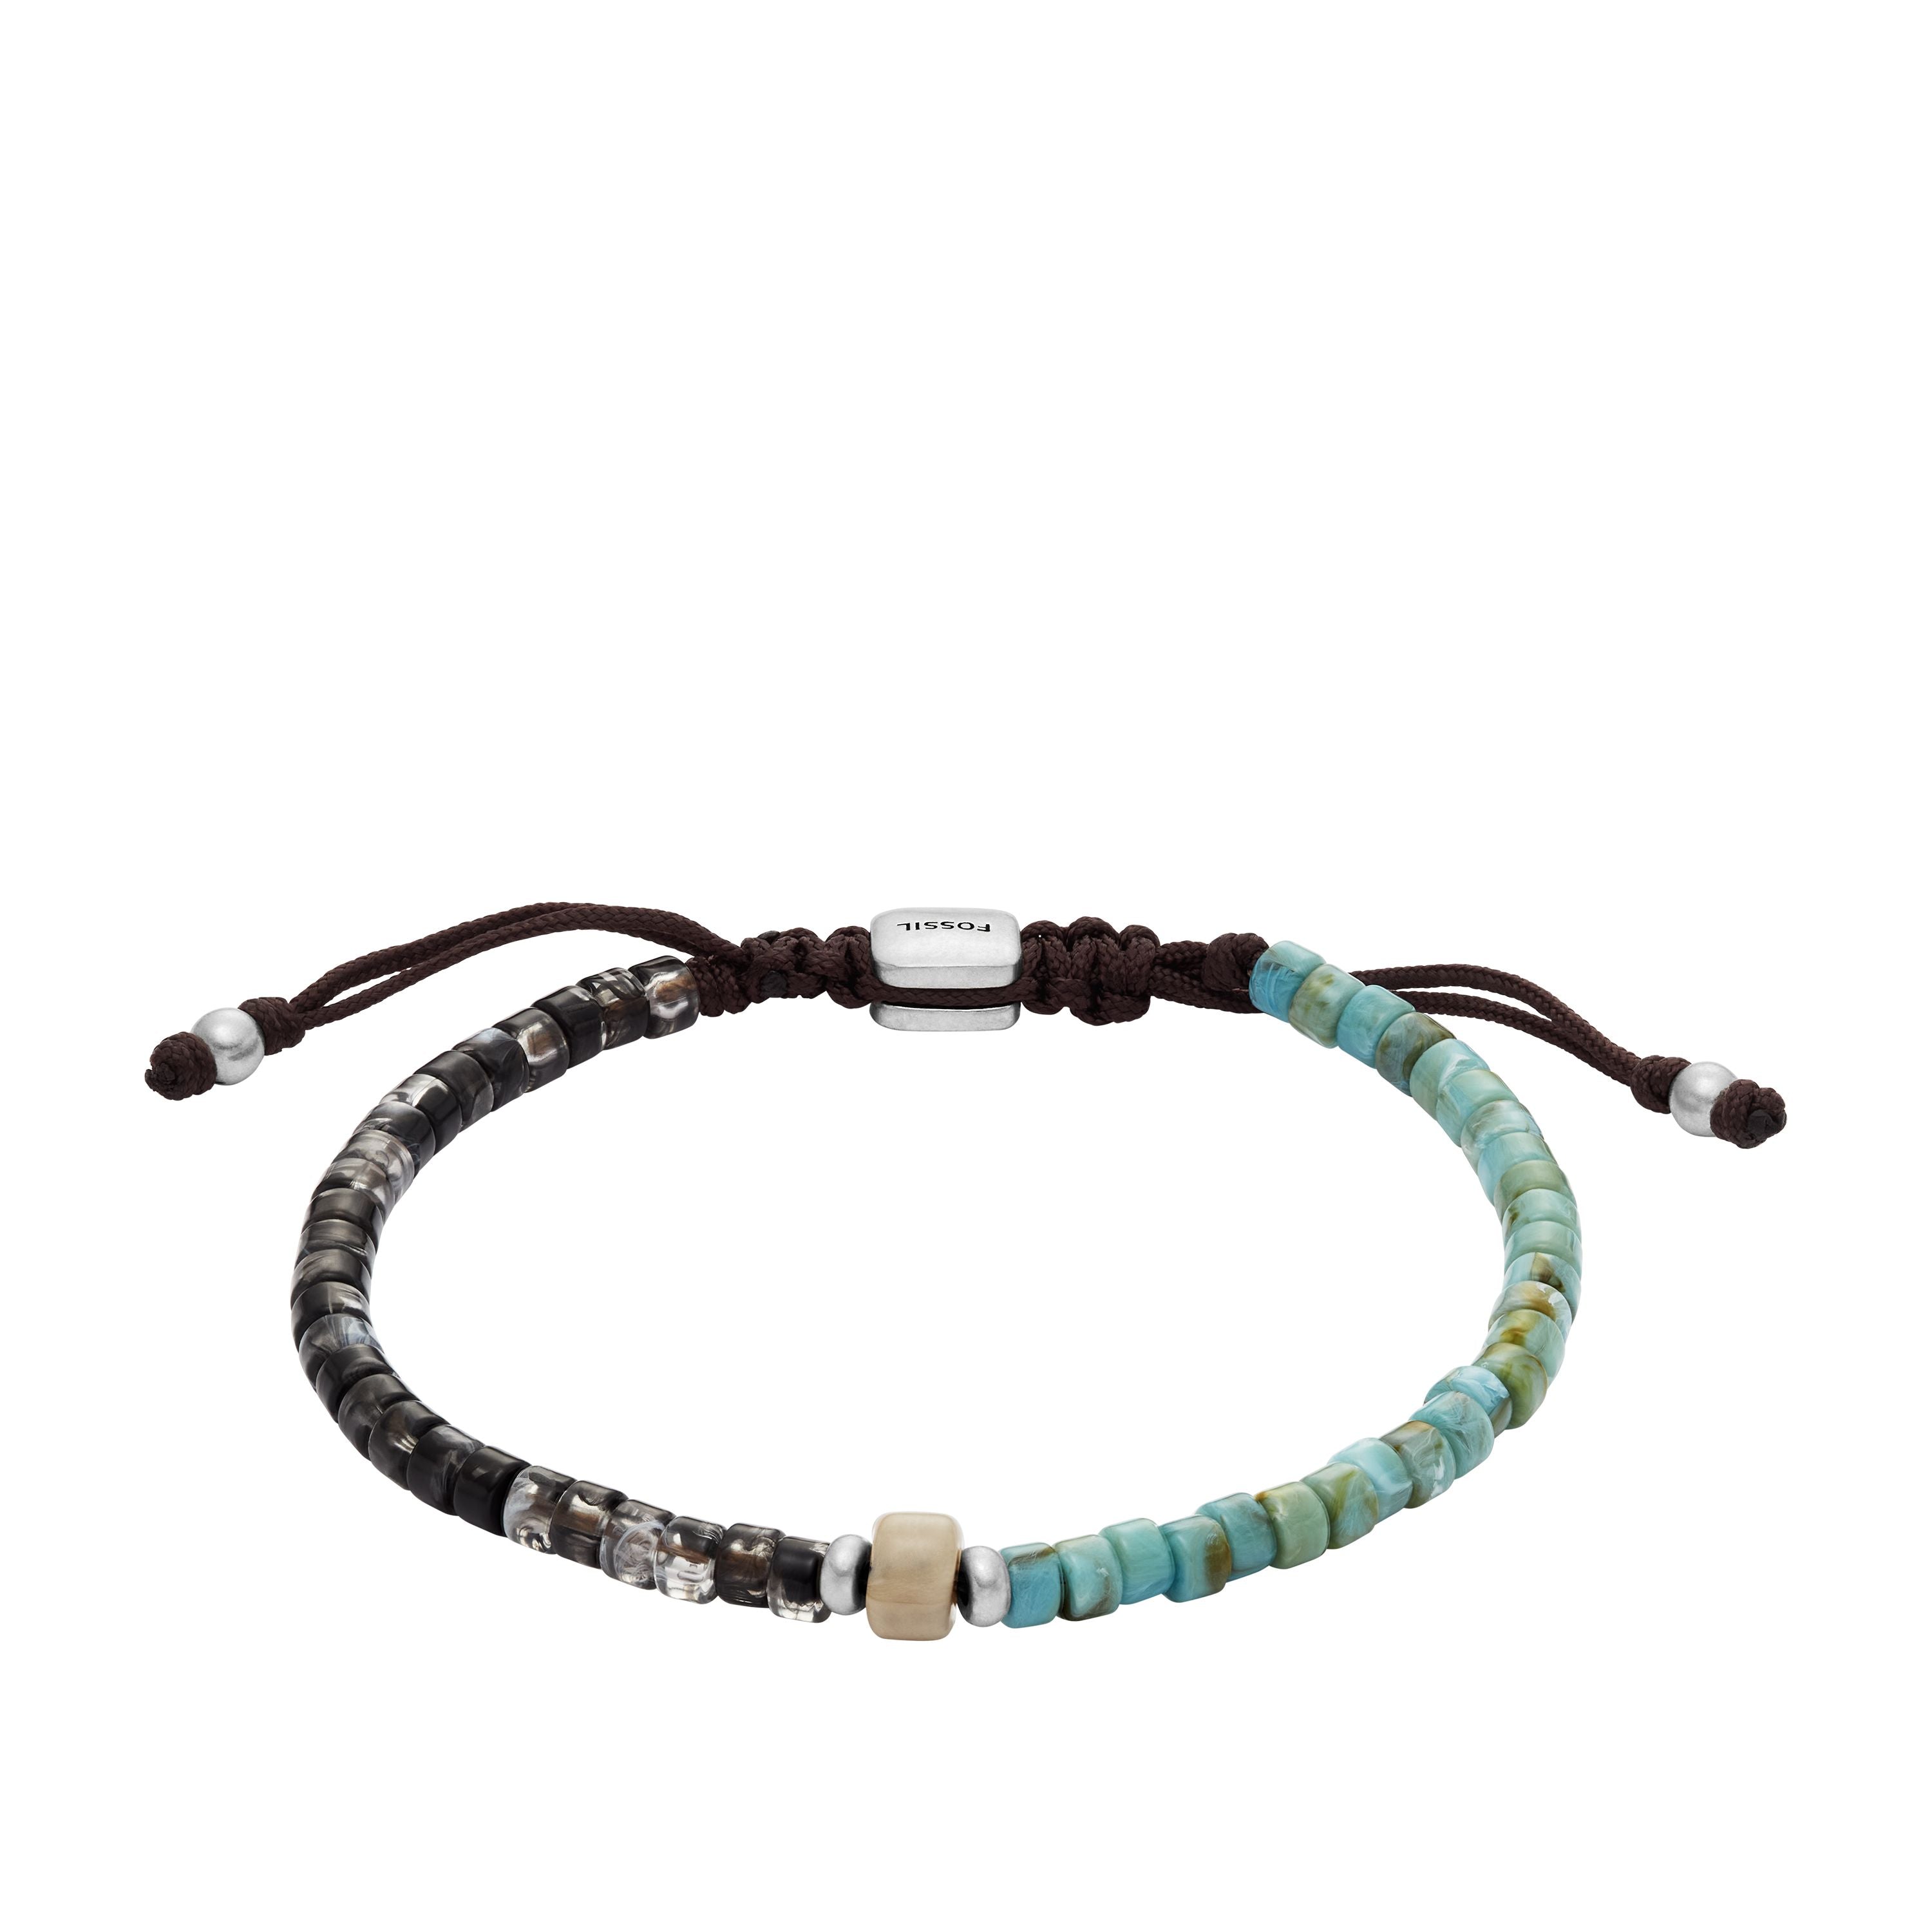 Fossil Men's Summer Fashion Turquoise And Black Acrylic Beaded Bracelet In Multi